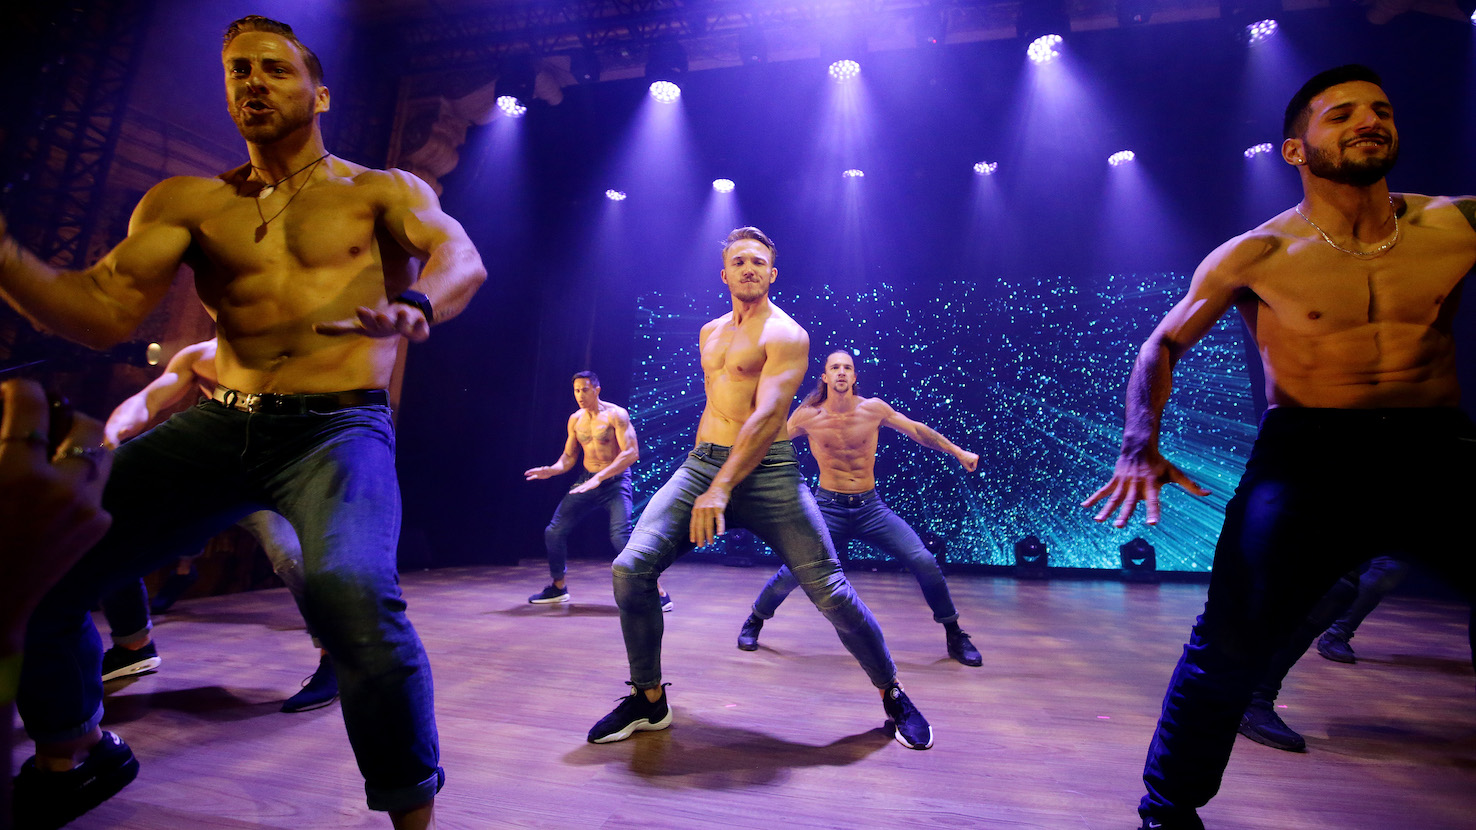 Magic Mike Live is coming to Brisbane and Melbourne in 2021